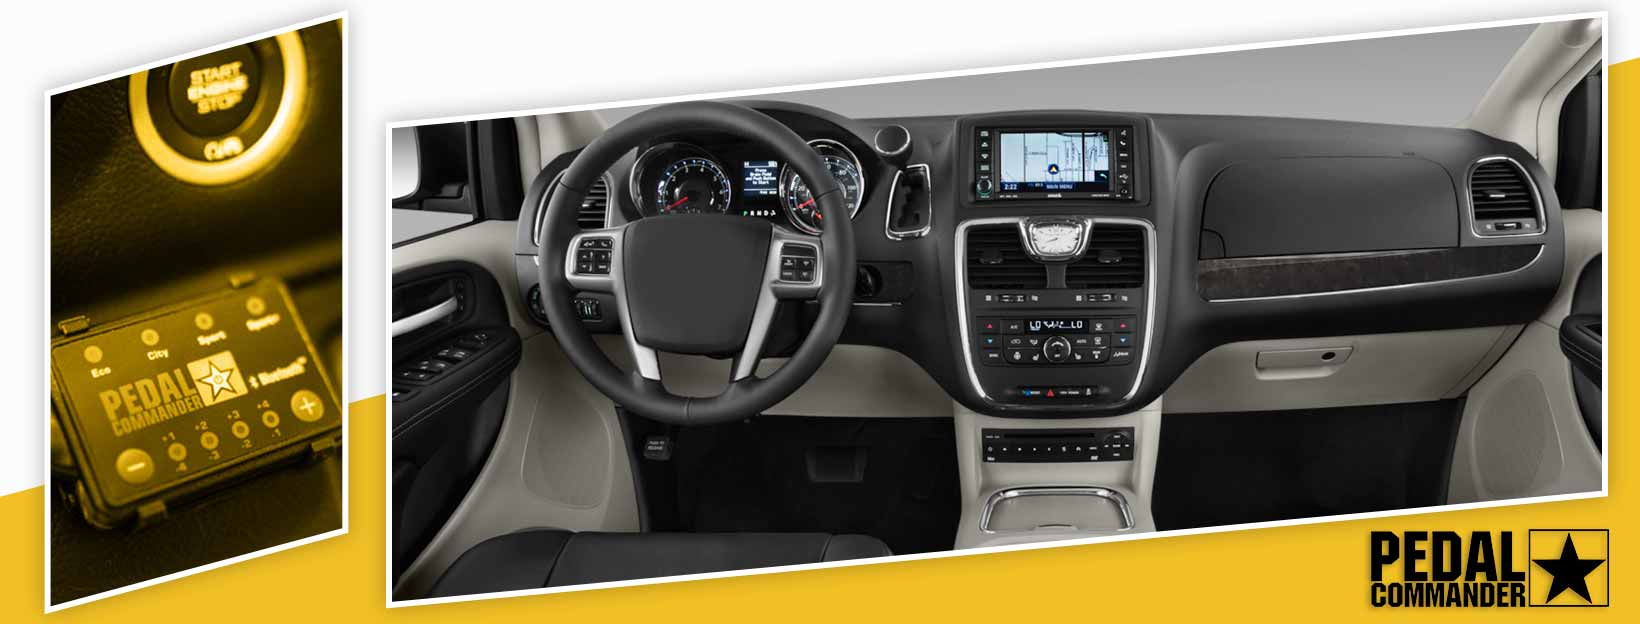 Pedal Commander for Chrysler Town and Country - interior